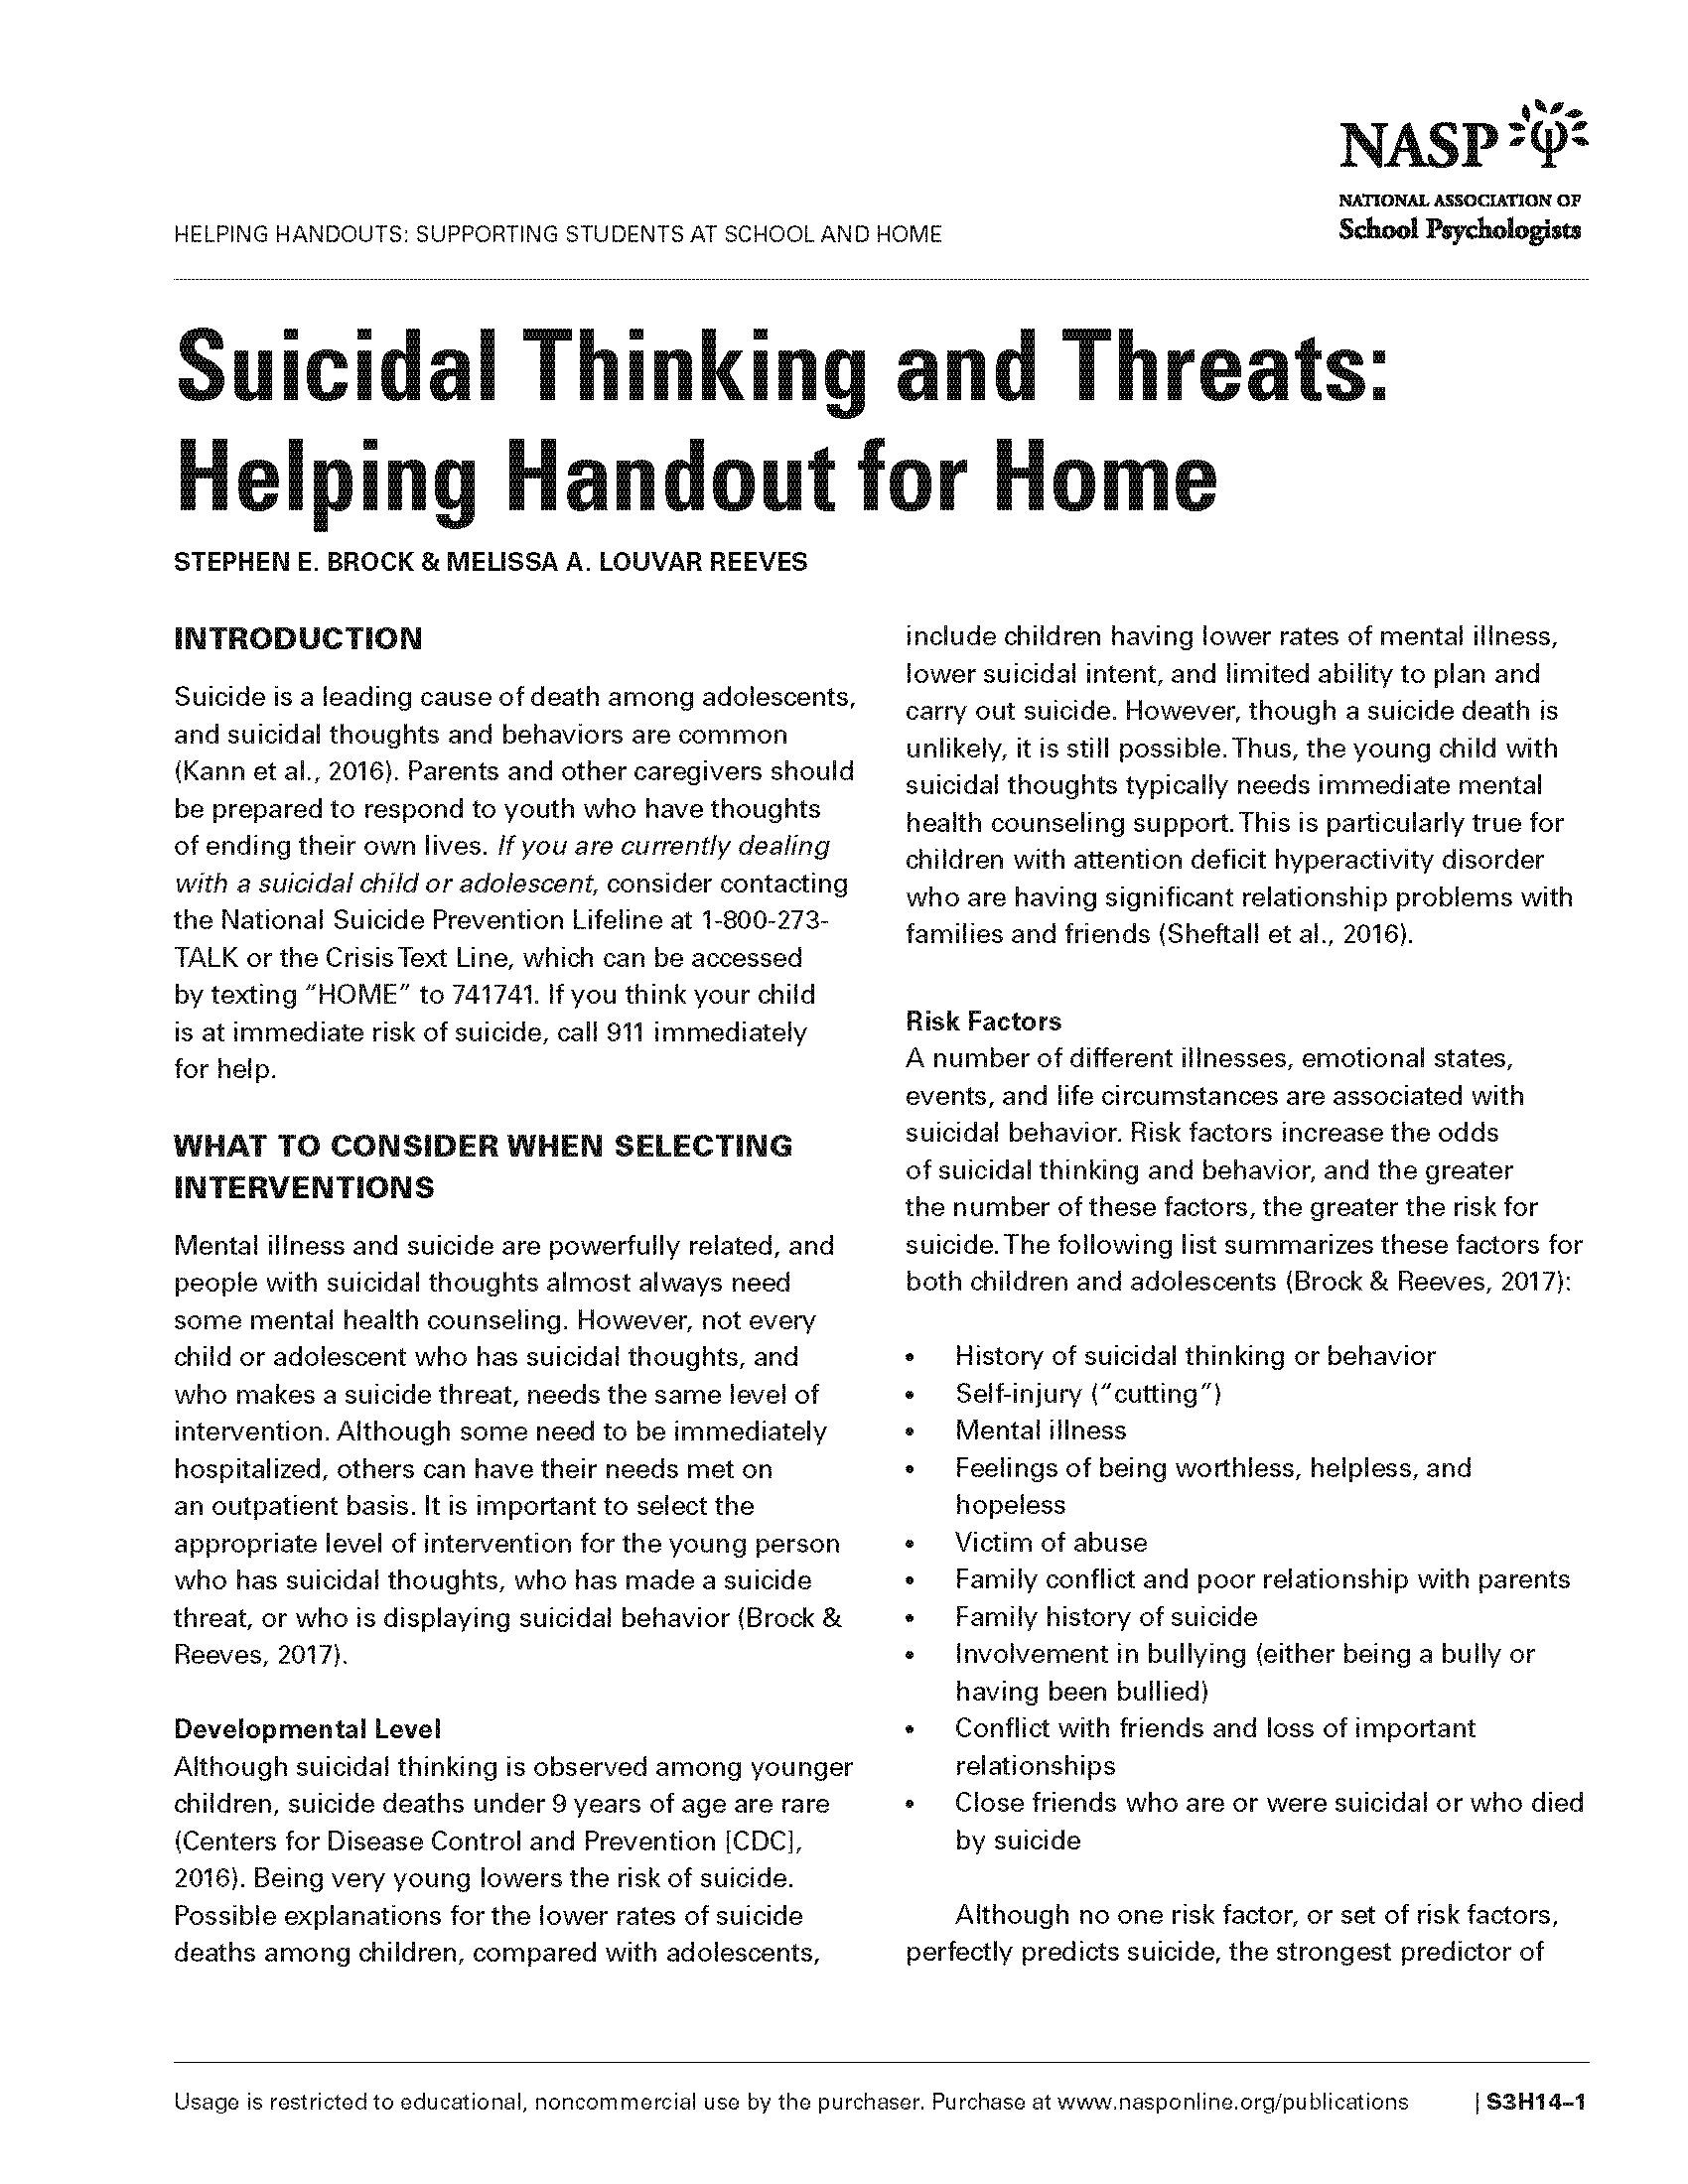 Suicidal Thinking and Threats: Helping Handout for Home